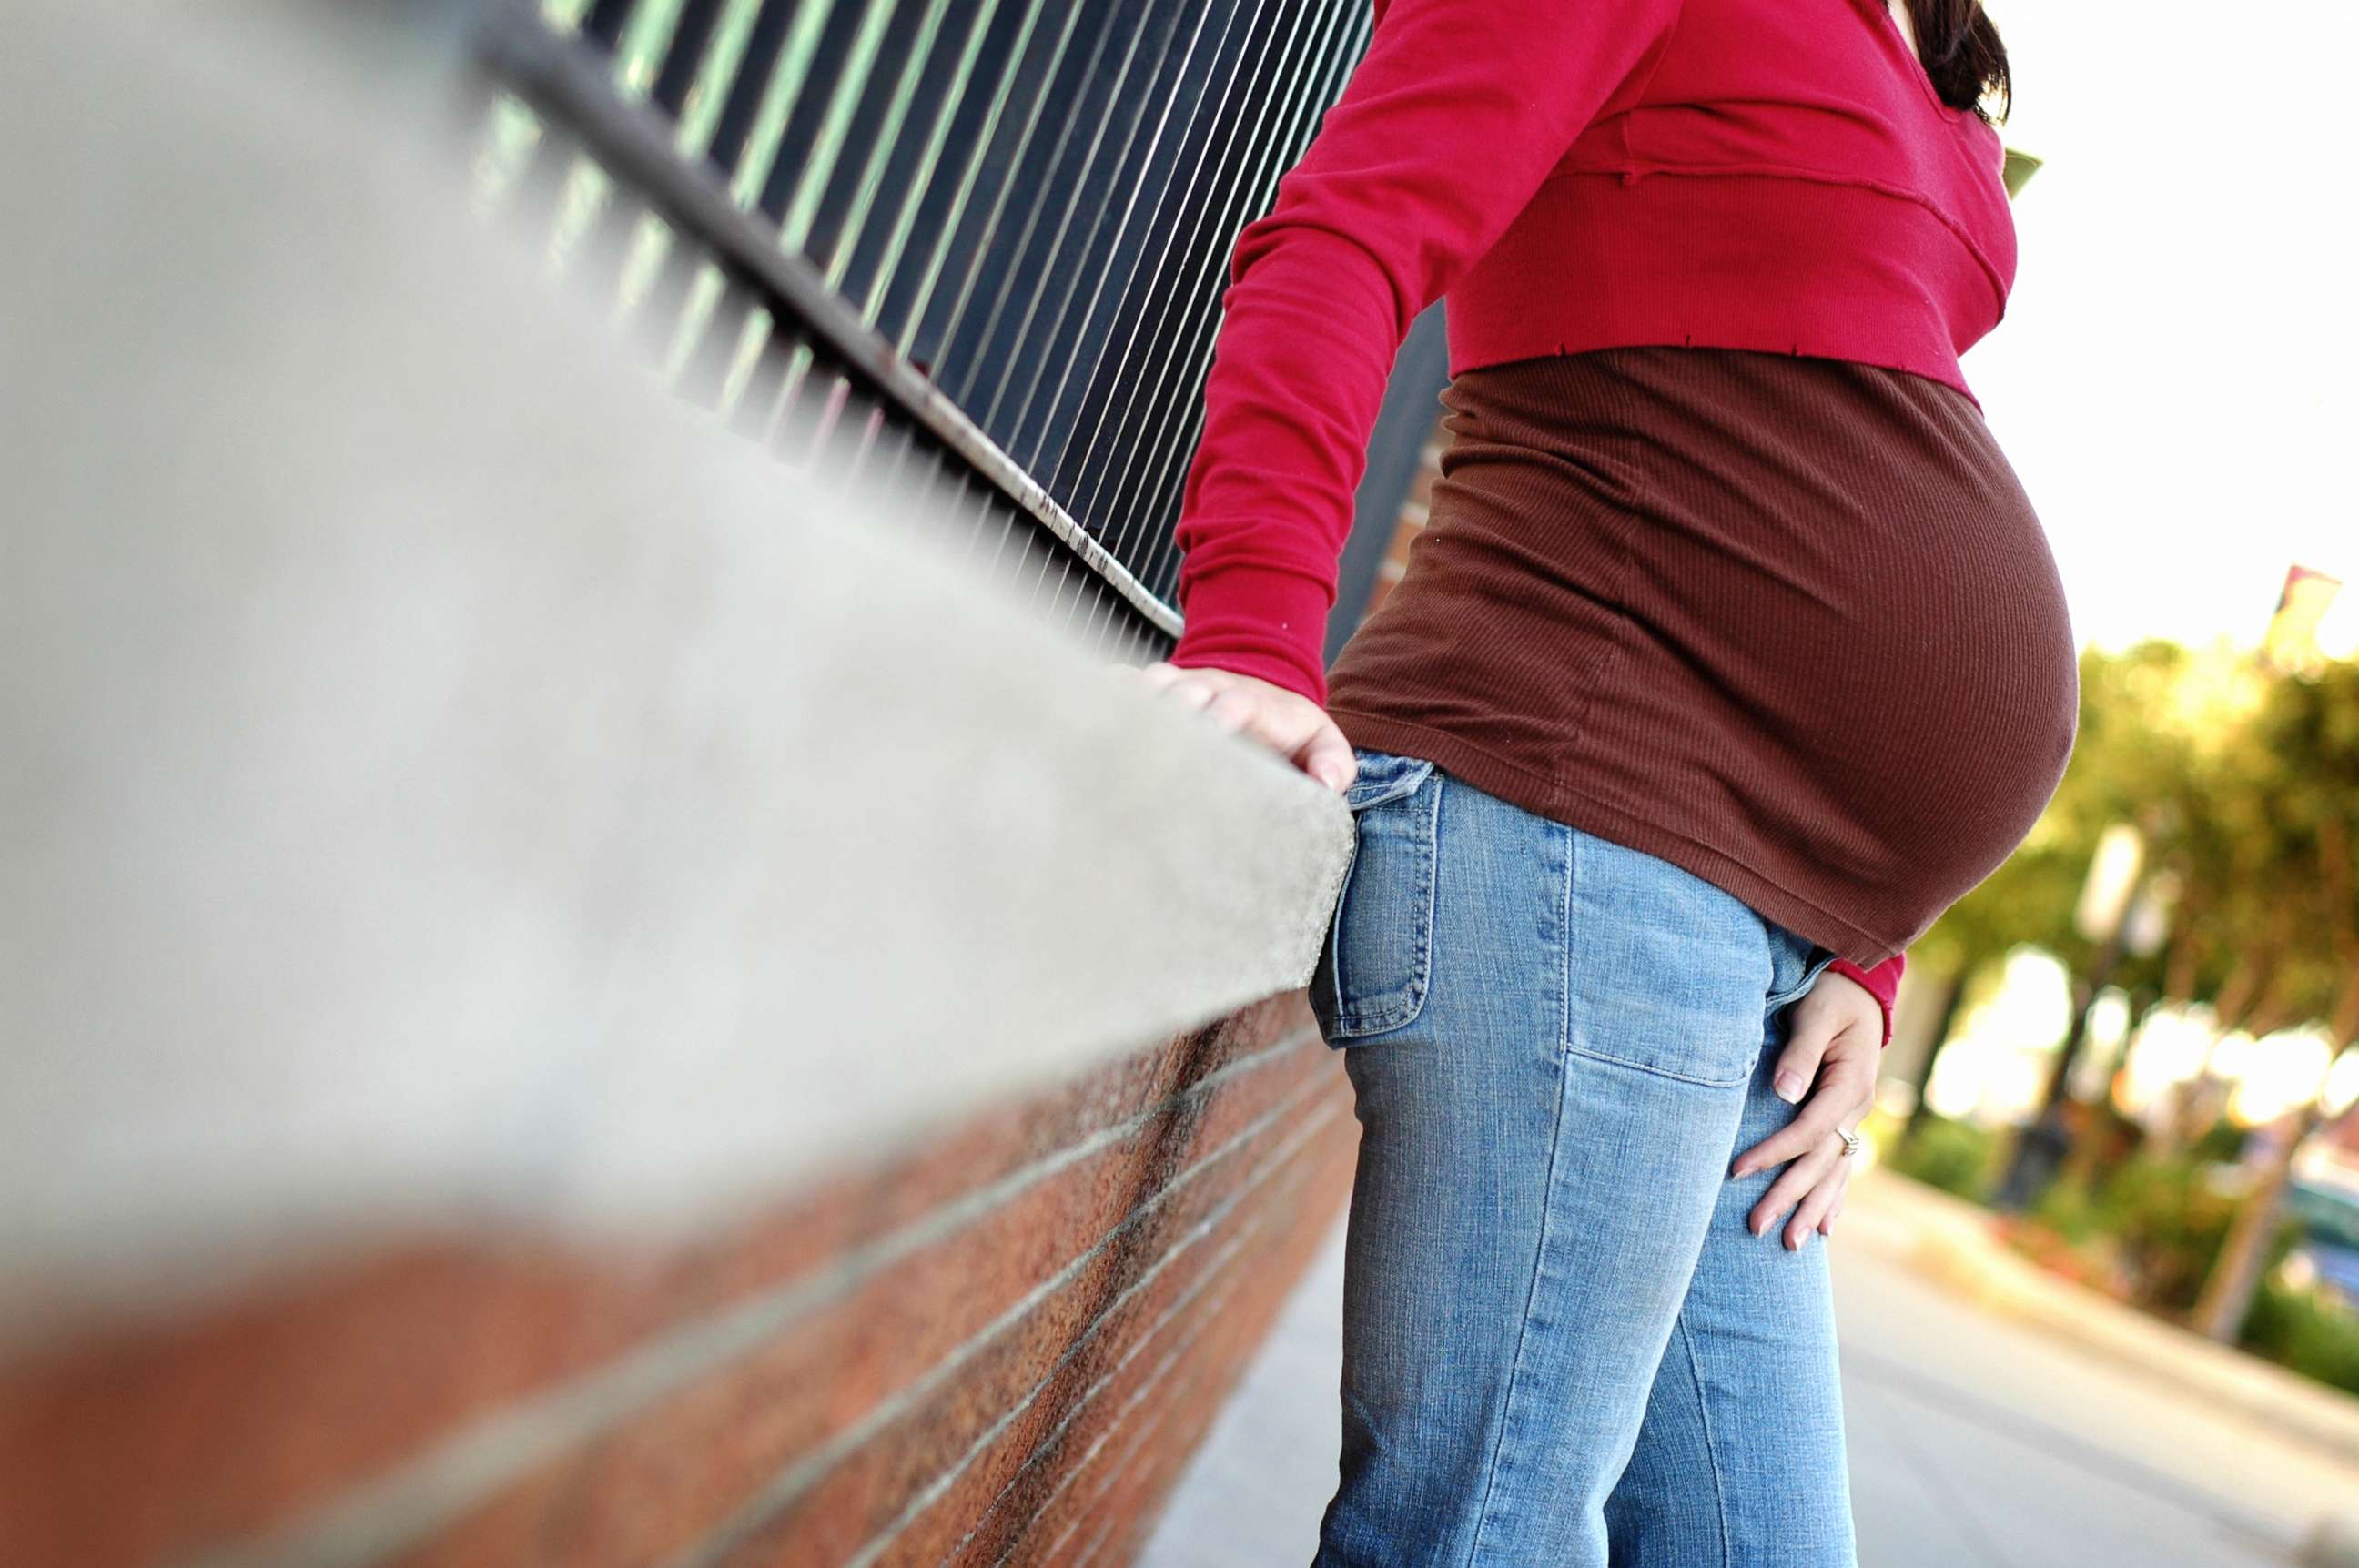 Teenage birth rates in the US reached historic lows in 2022, CDC report finds